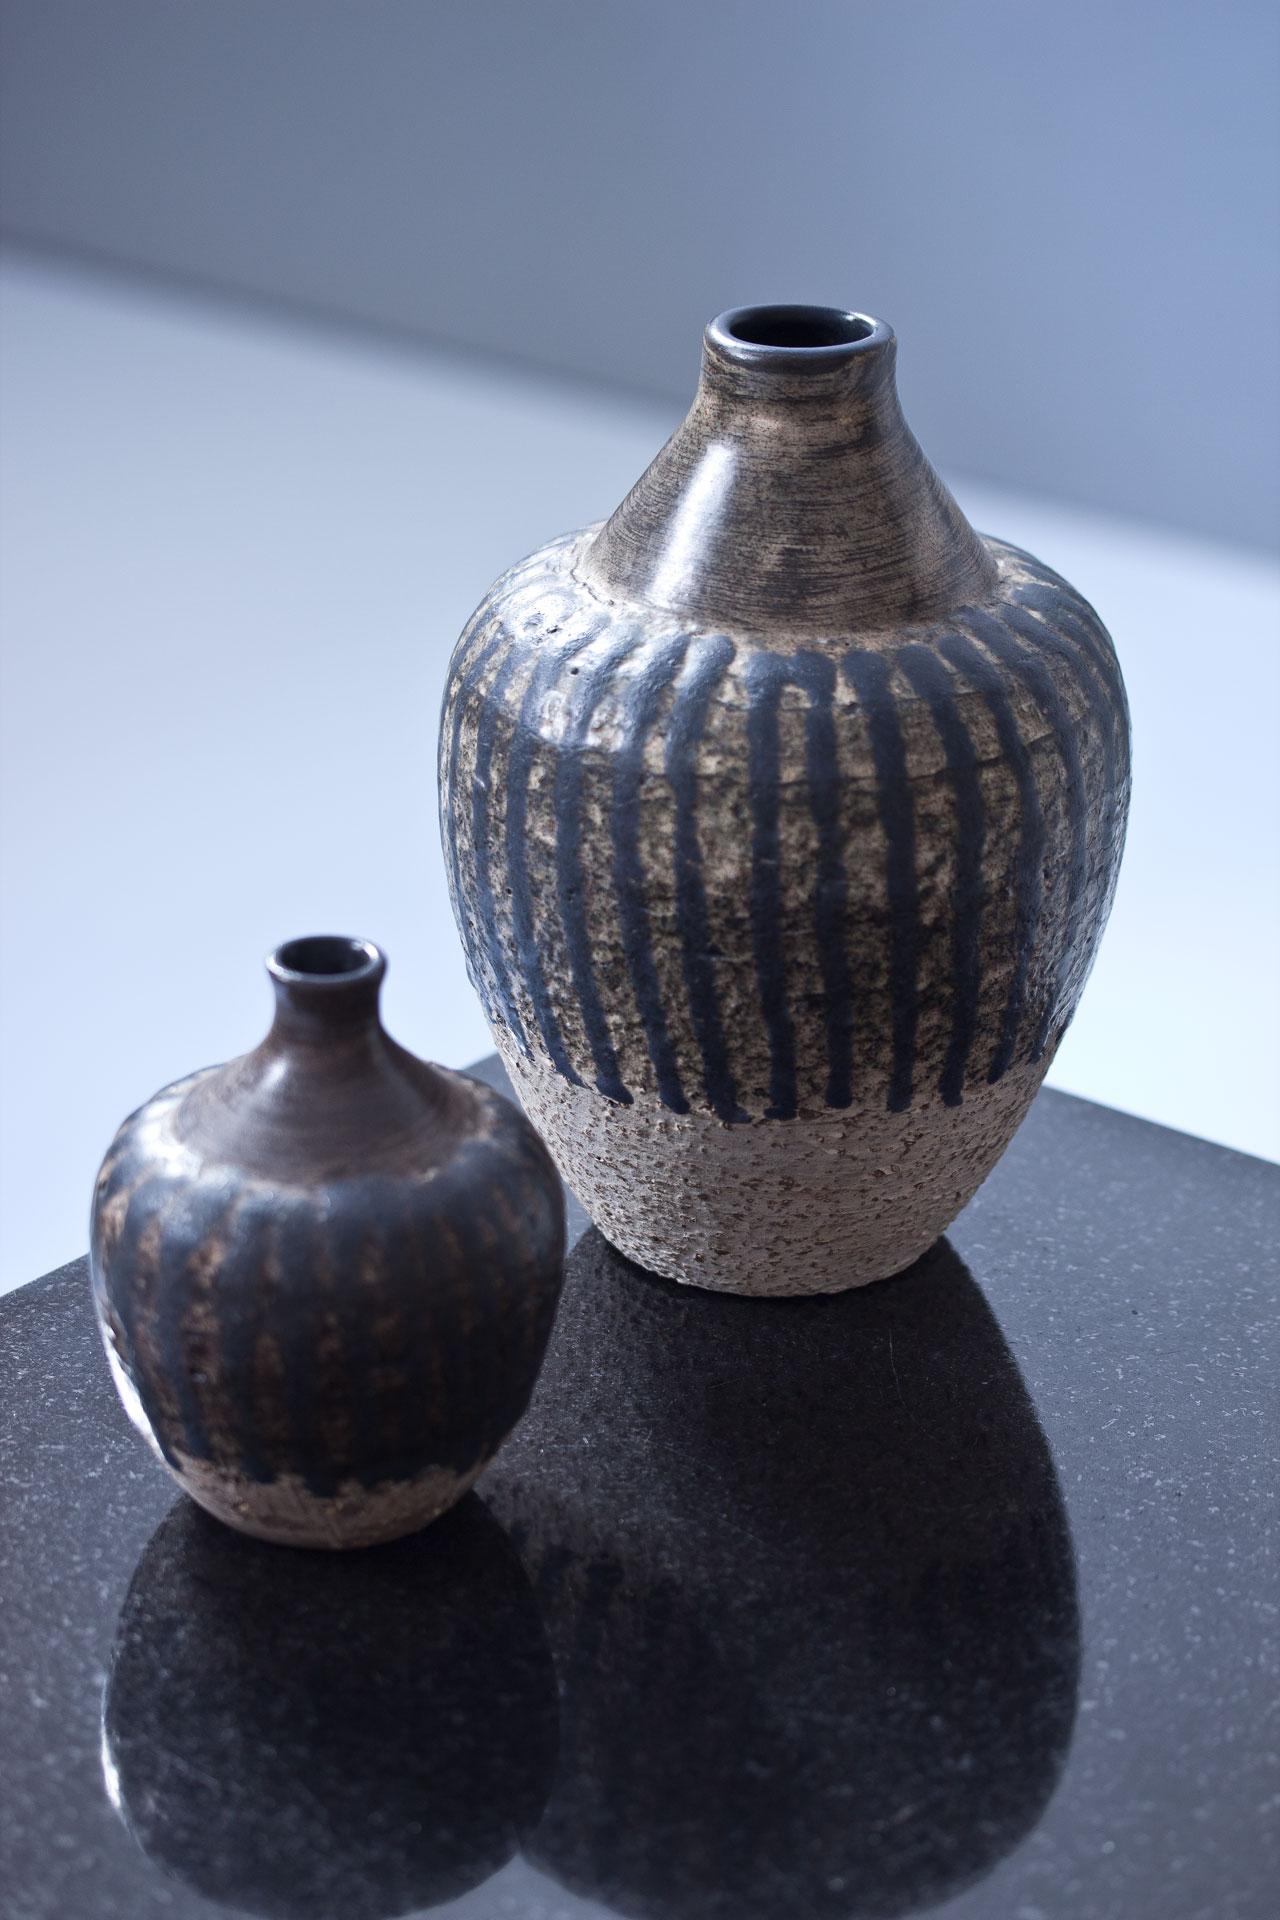 Set of two vases from the Kalebass (Gourd) series designed by Mari Simmulson. Manufactured by Upsala-Ekeby in Sweden in 1967. Made. from partially chamotted stoneware. Signed on the bottom and labeled.